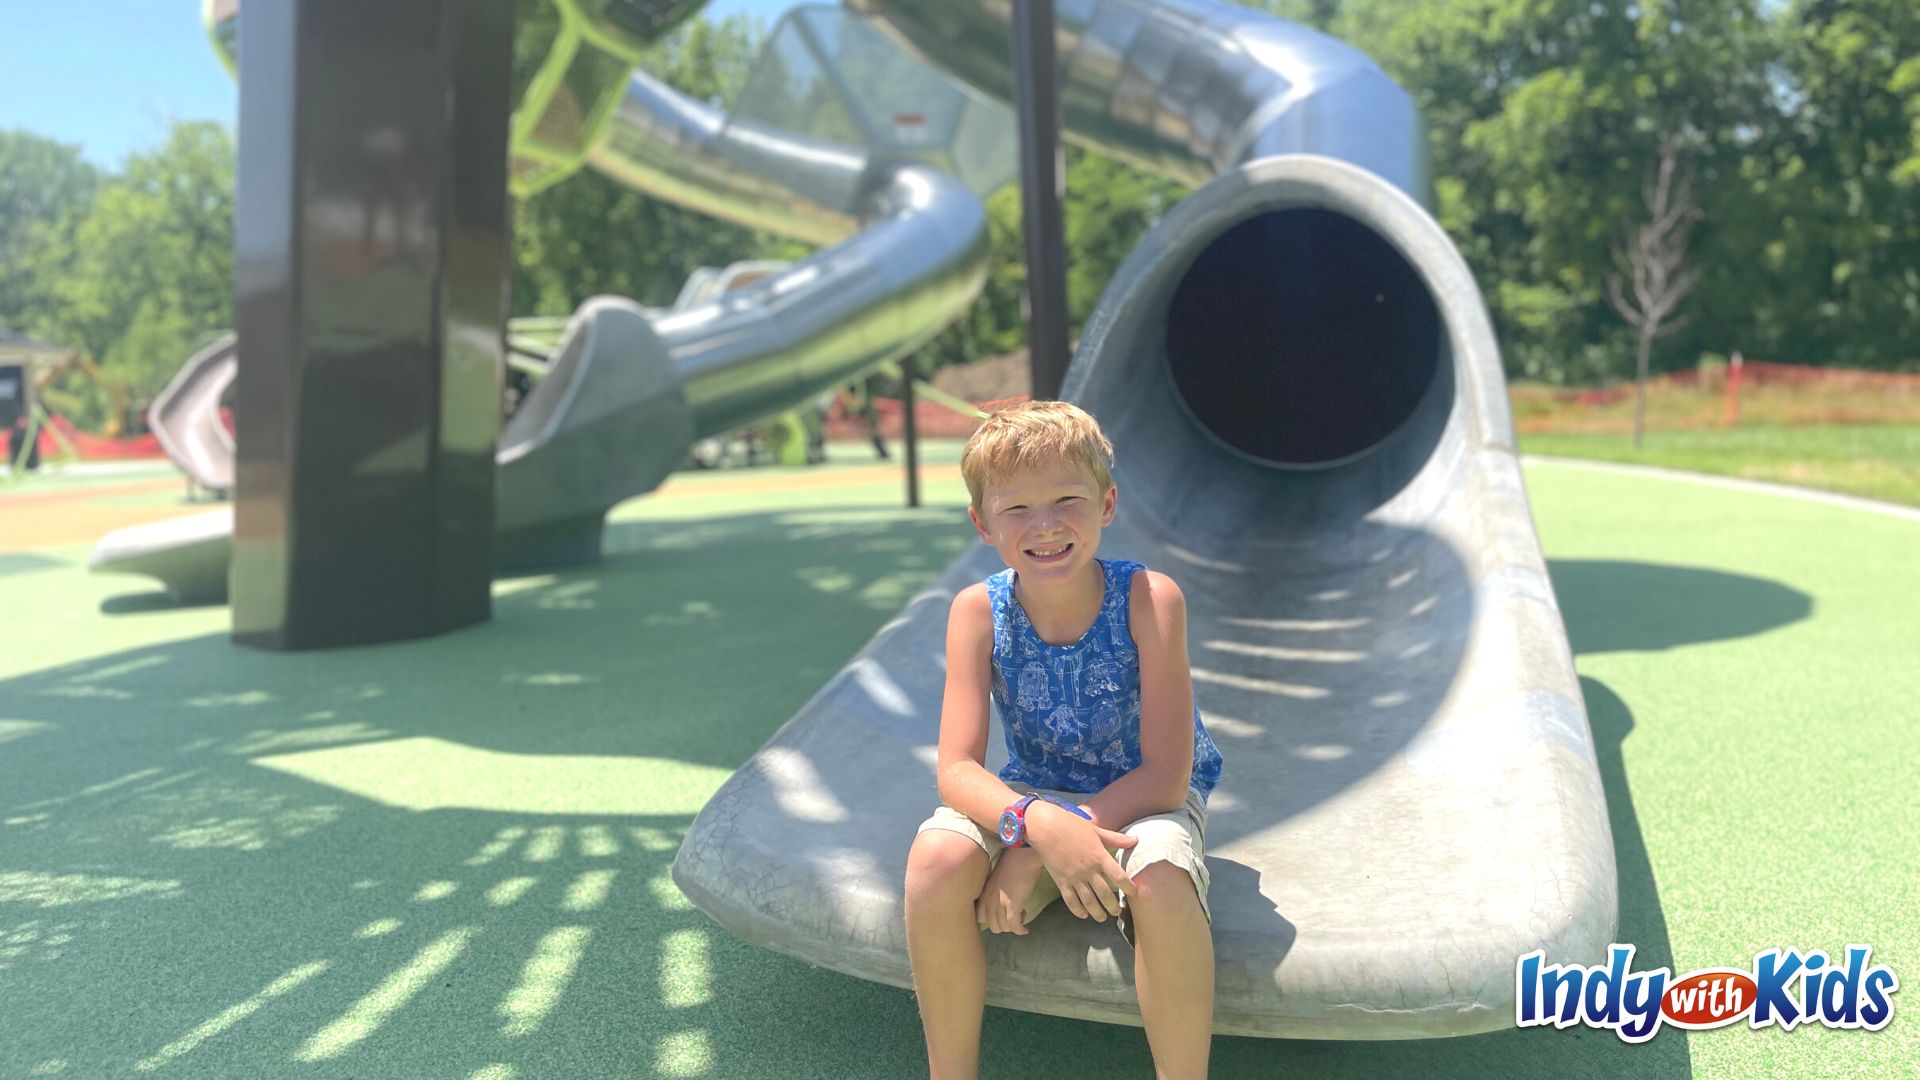 Meadowlark Park in Carmel has three age-appropriate playgrounds